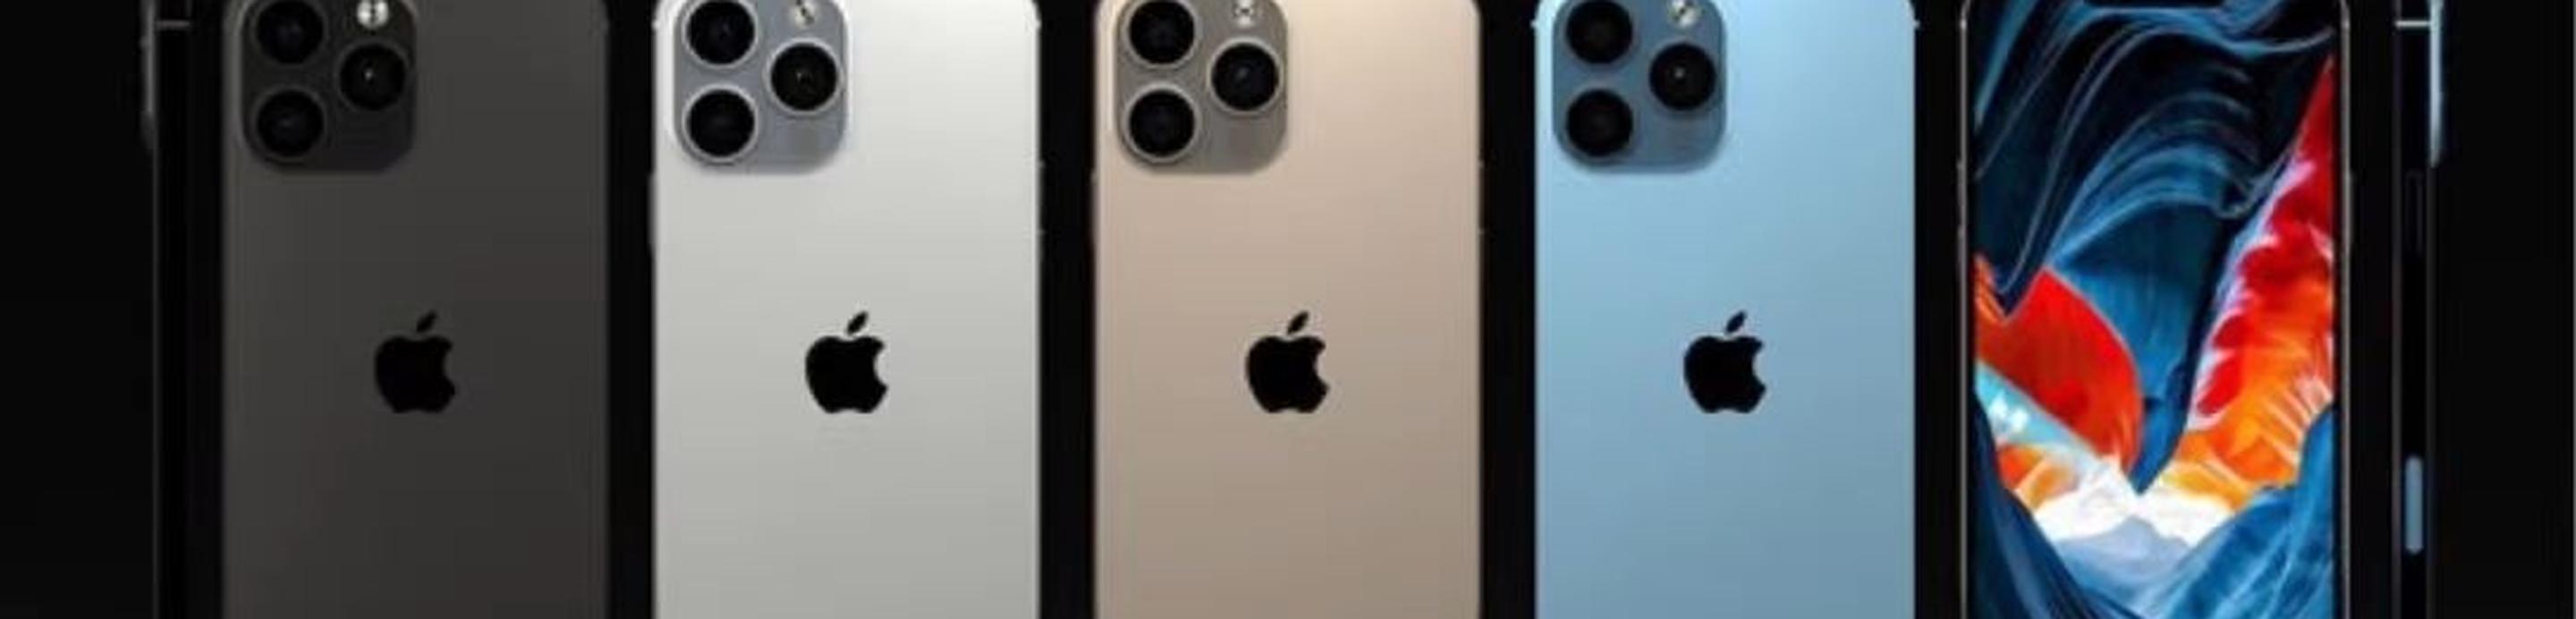 colores iphone 13